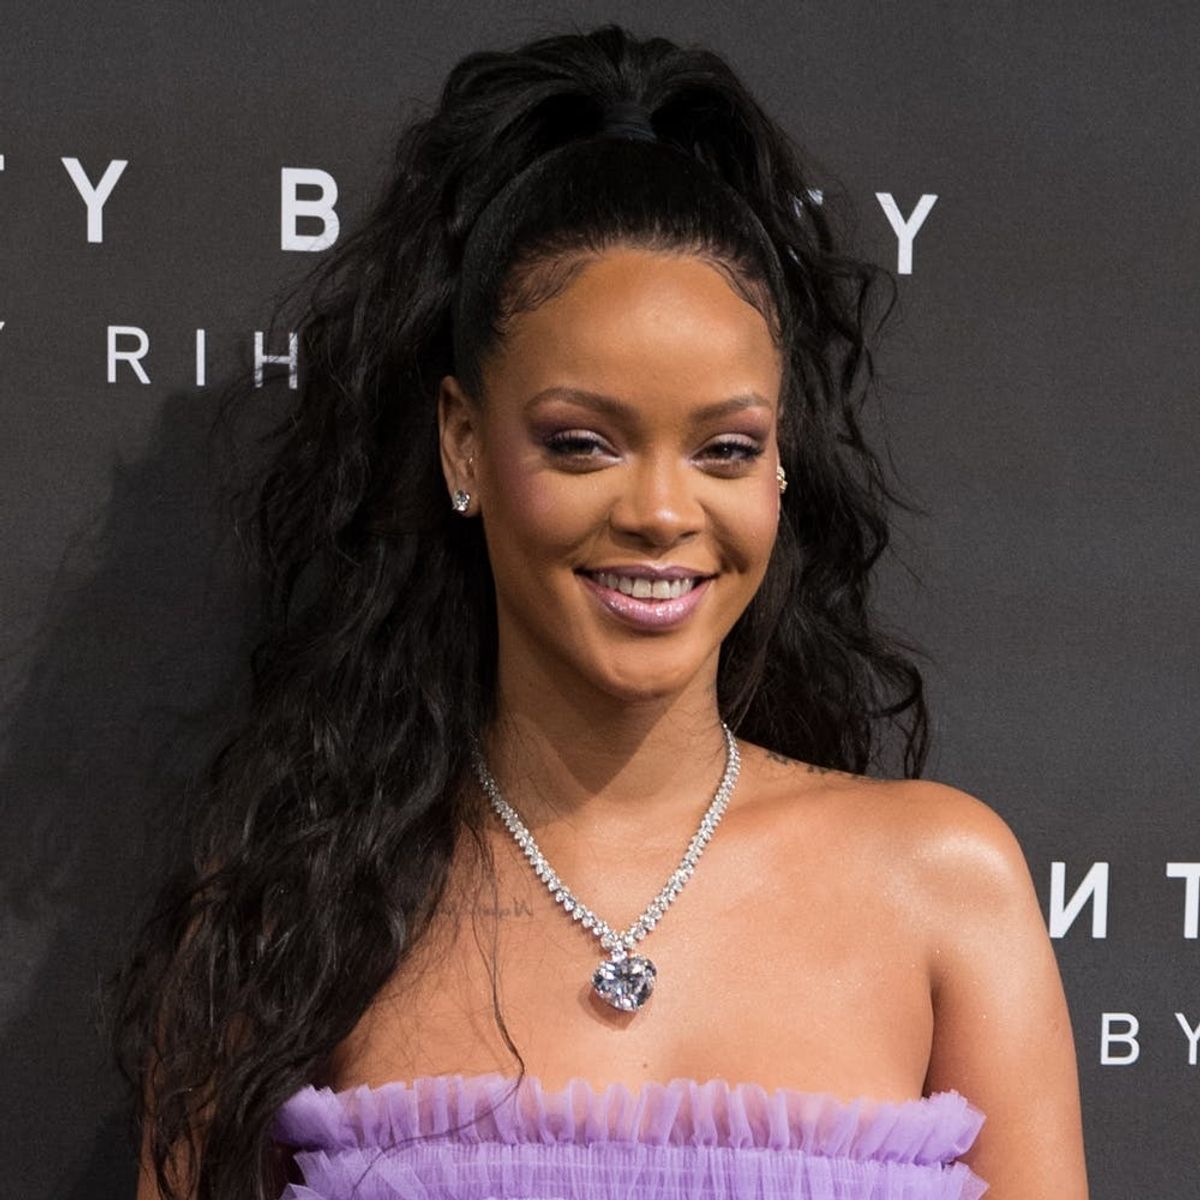 Rihanna Says She and Drake ‘Don’t Have a Friendship Now’